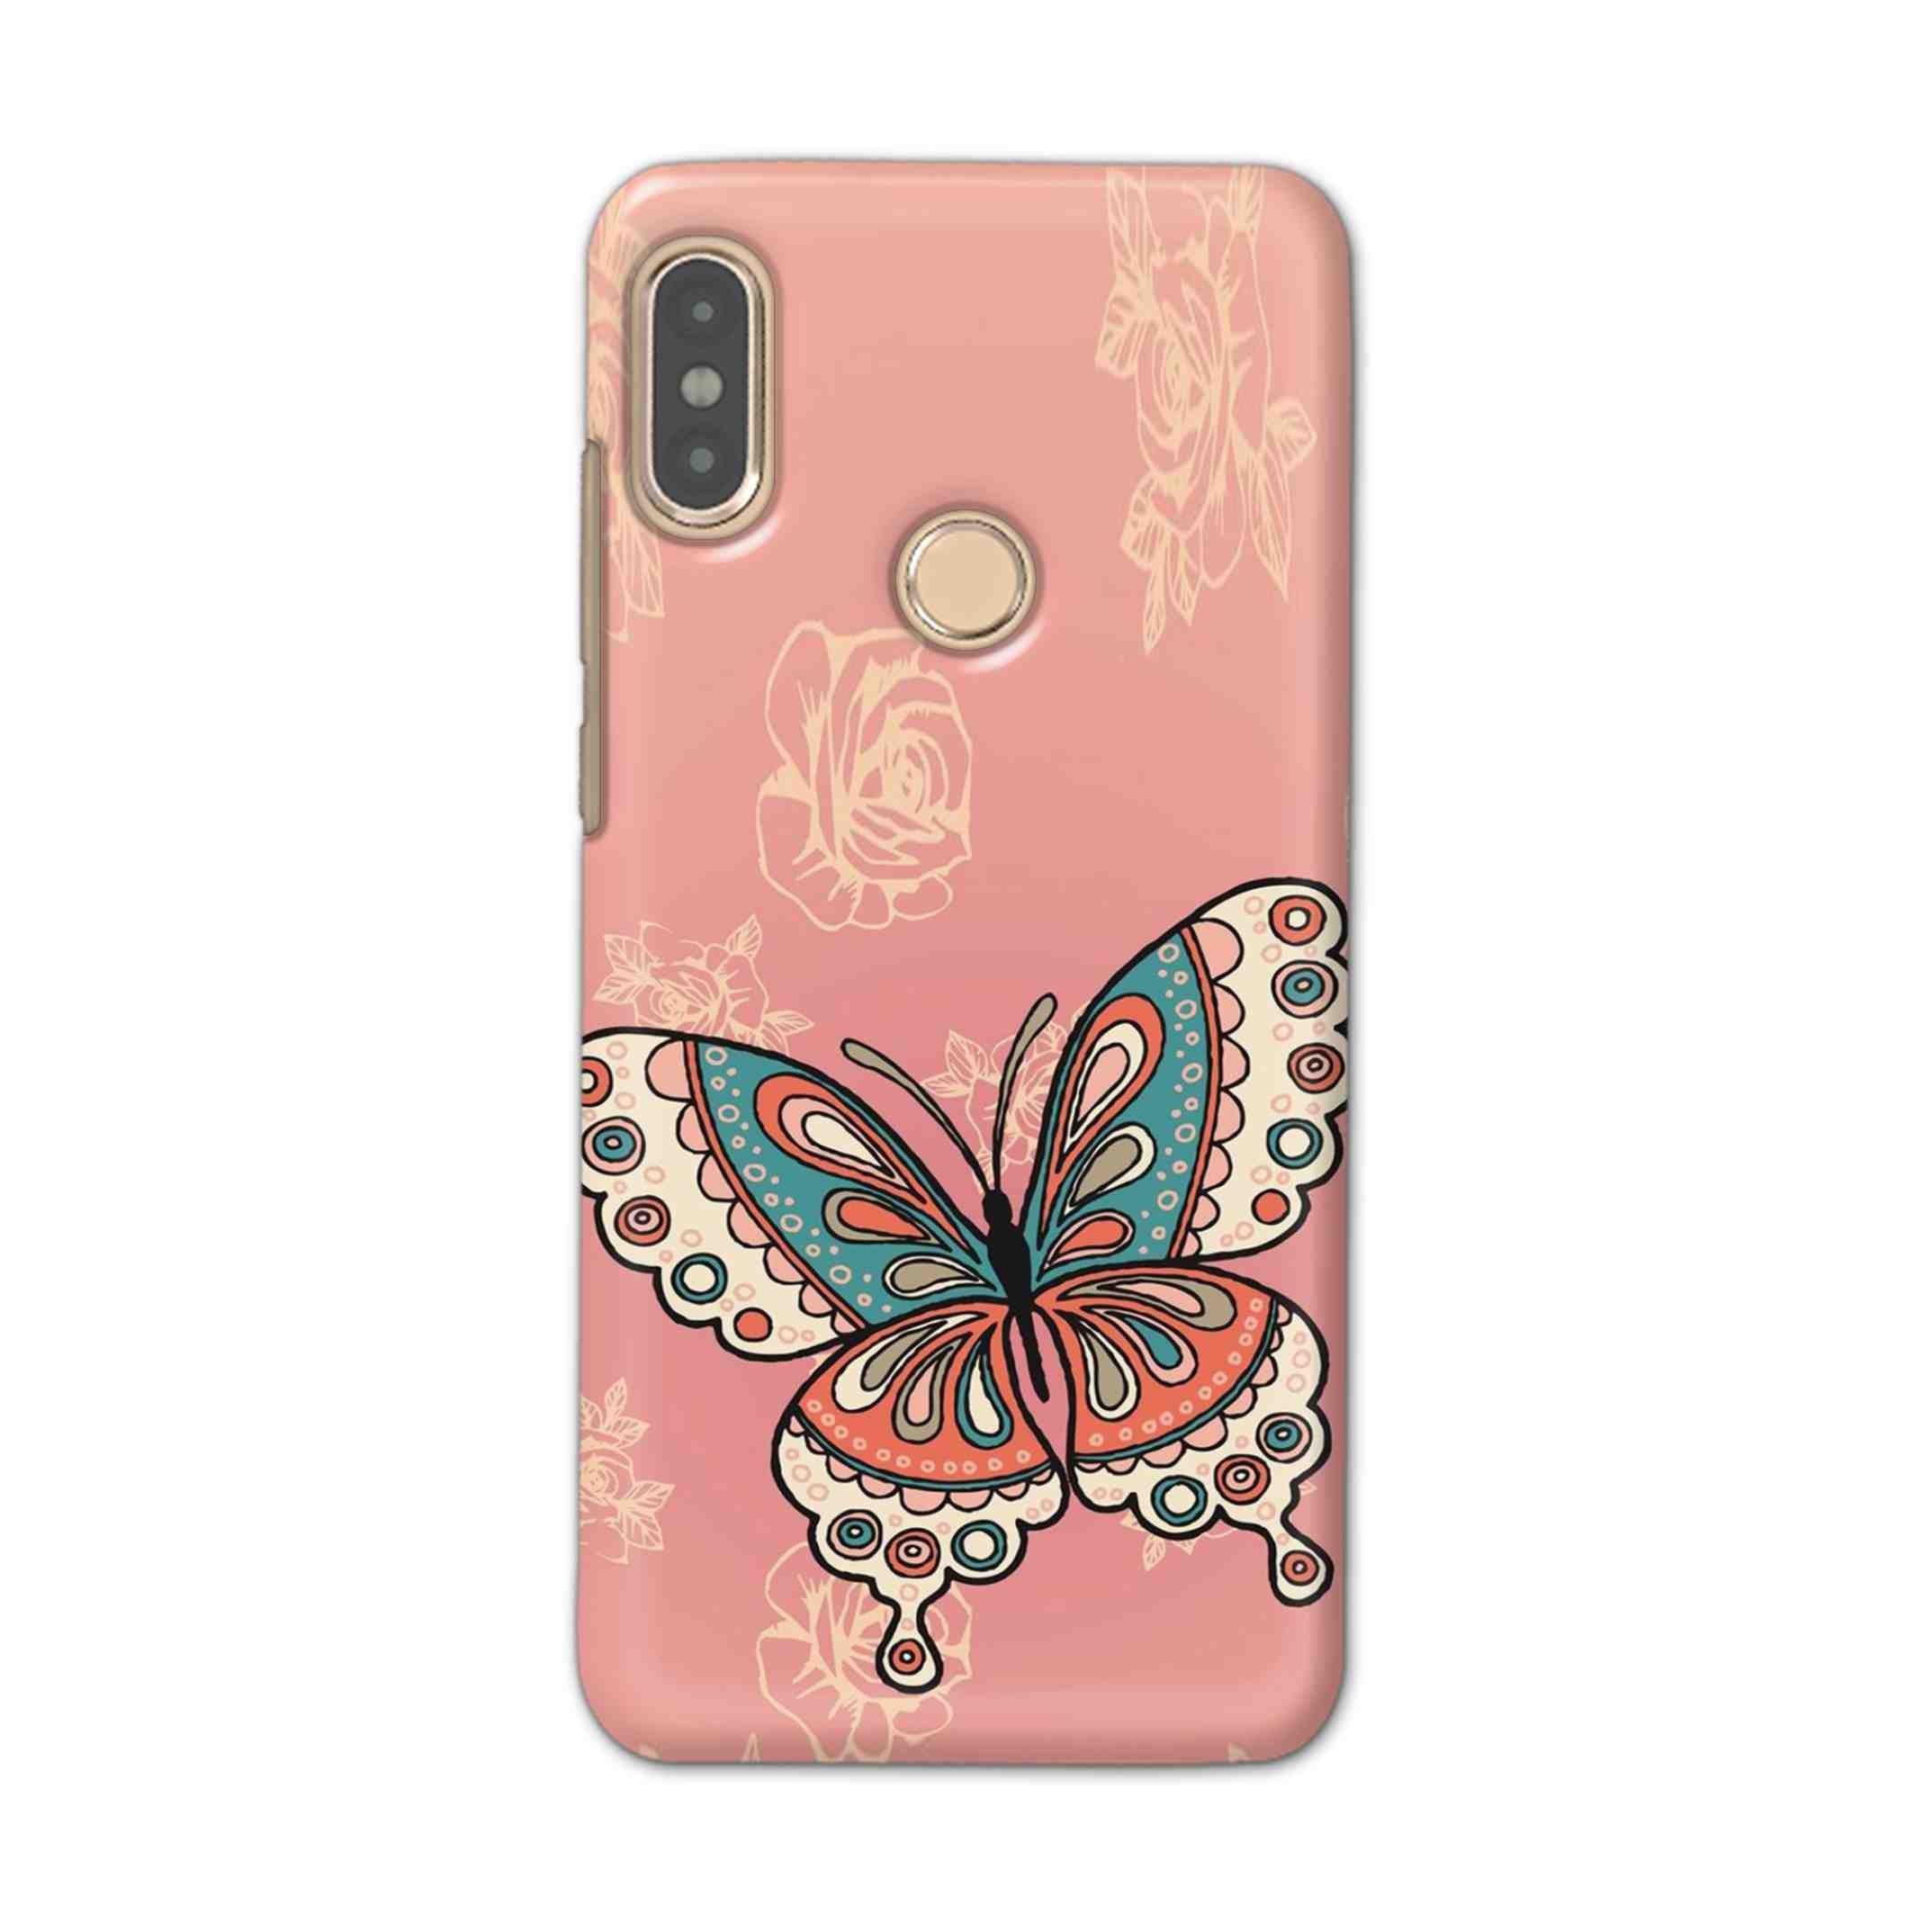 Buy Butterfly Hard Back Mobile Phone Case Cover For Xiaomi Redmi Note 5 Pro Online